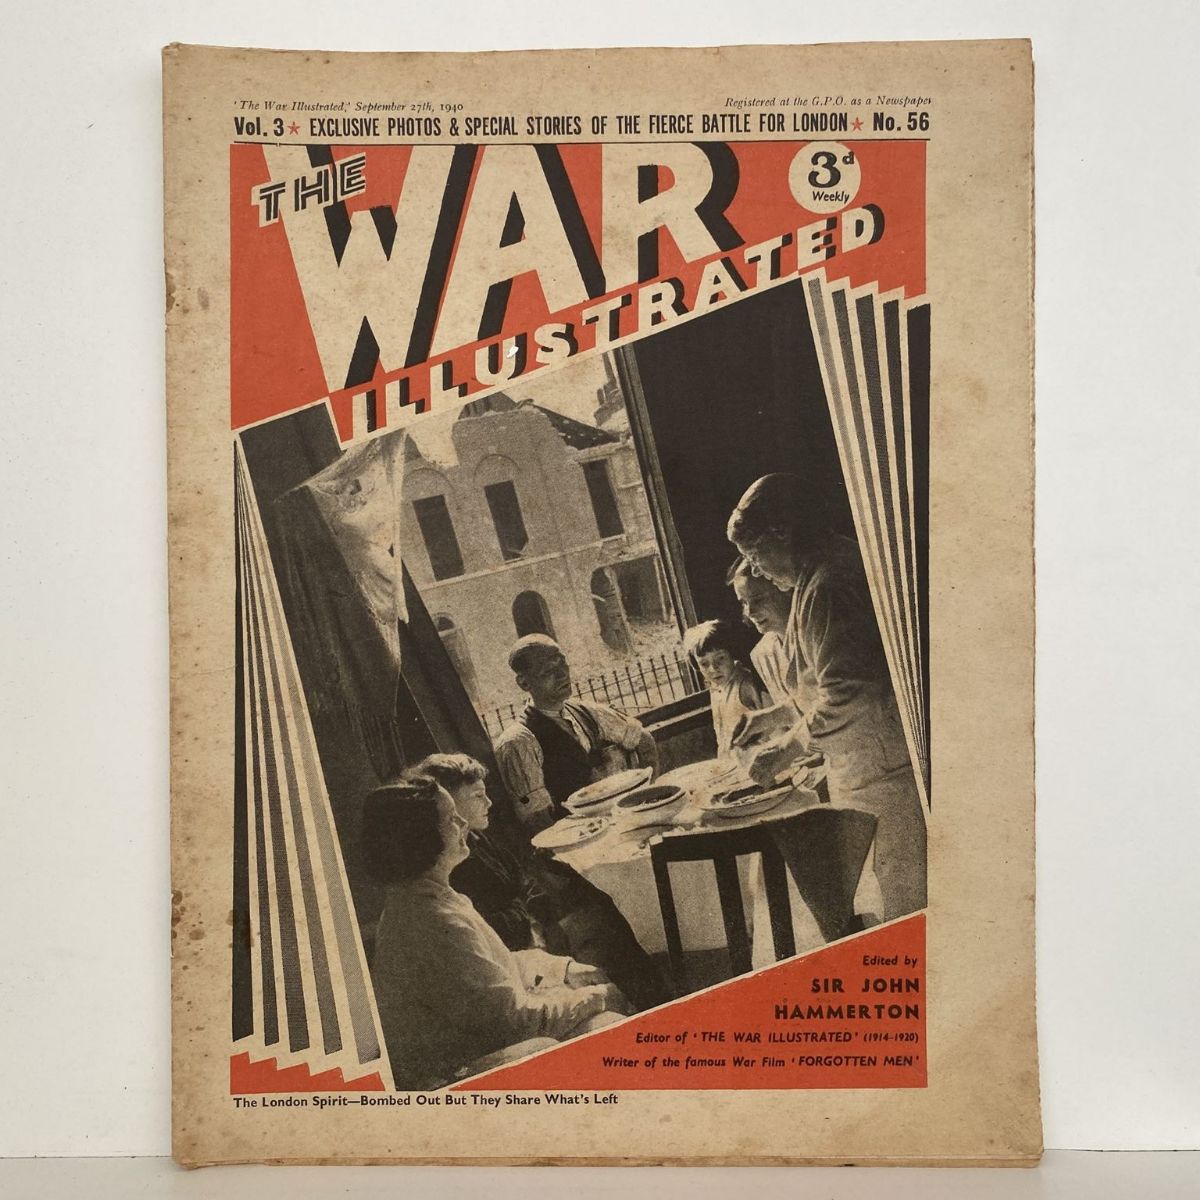 THE WAR ILLUSTRATED - Vol 3, No 56, 27th Sept 1940